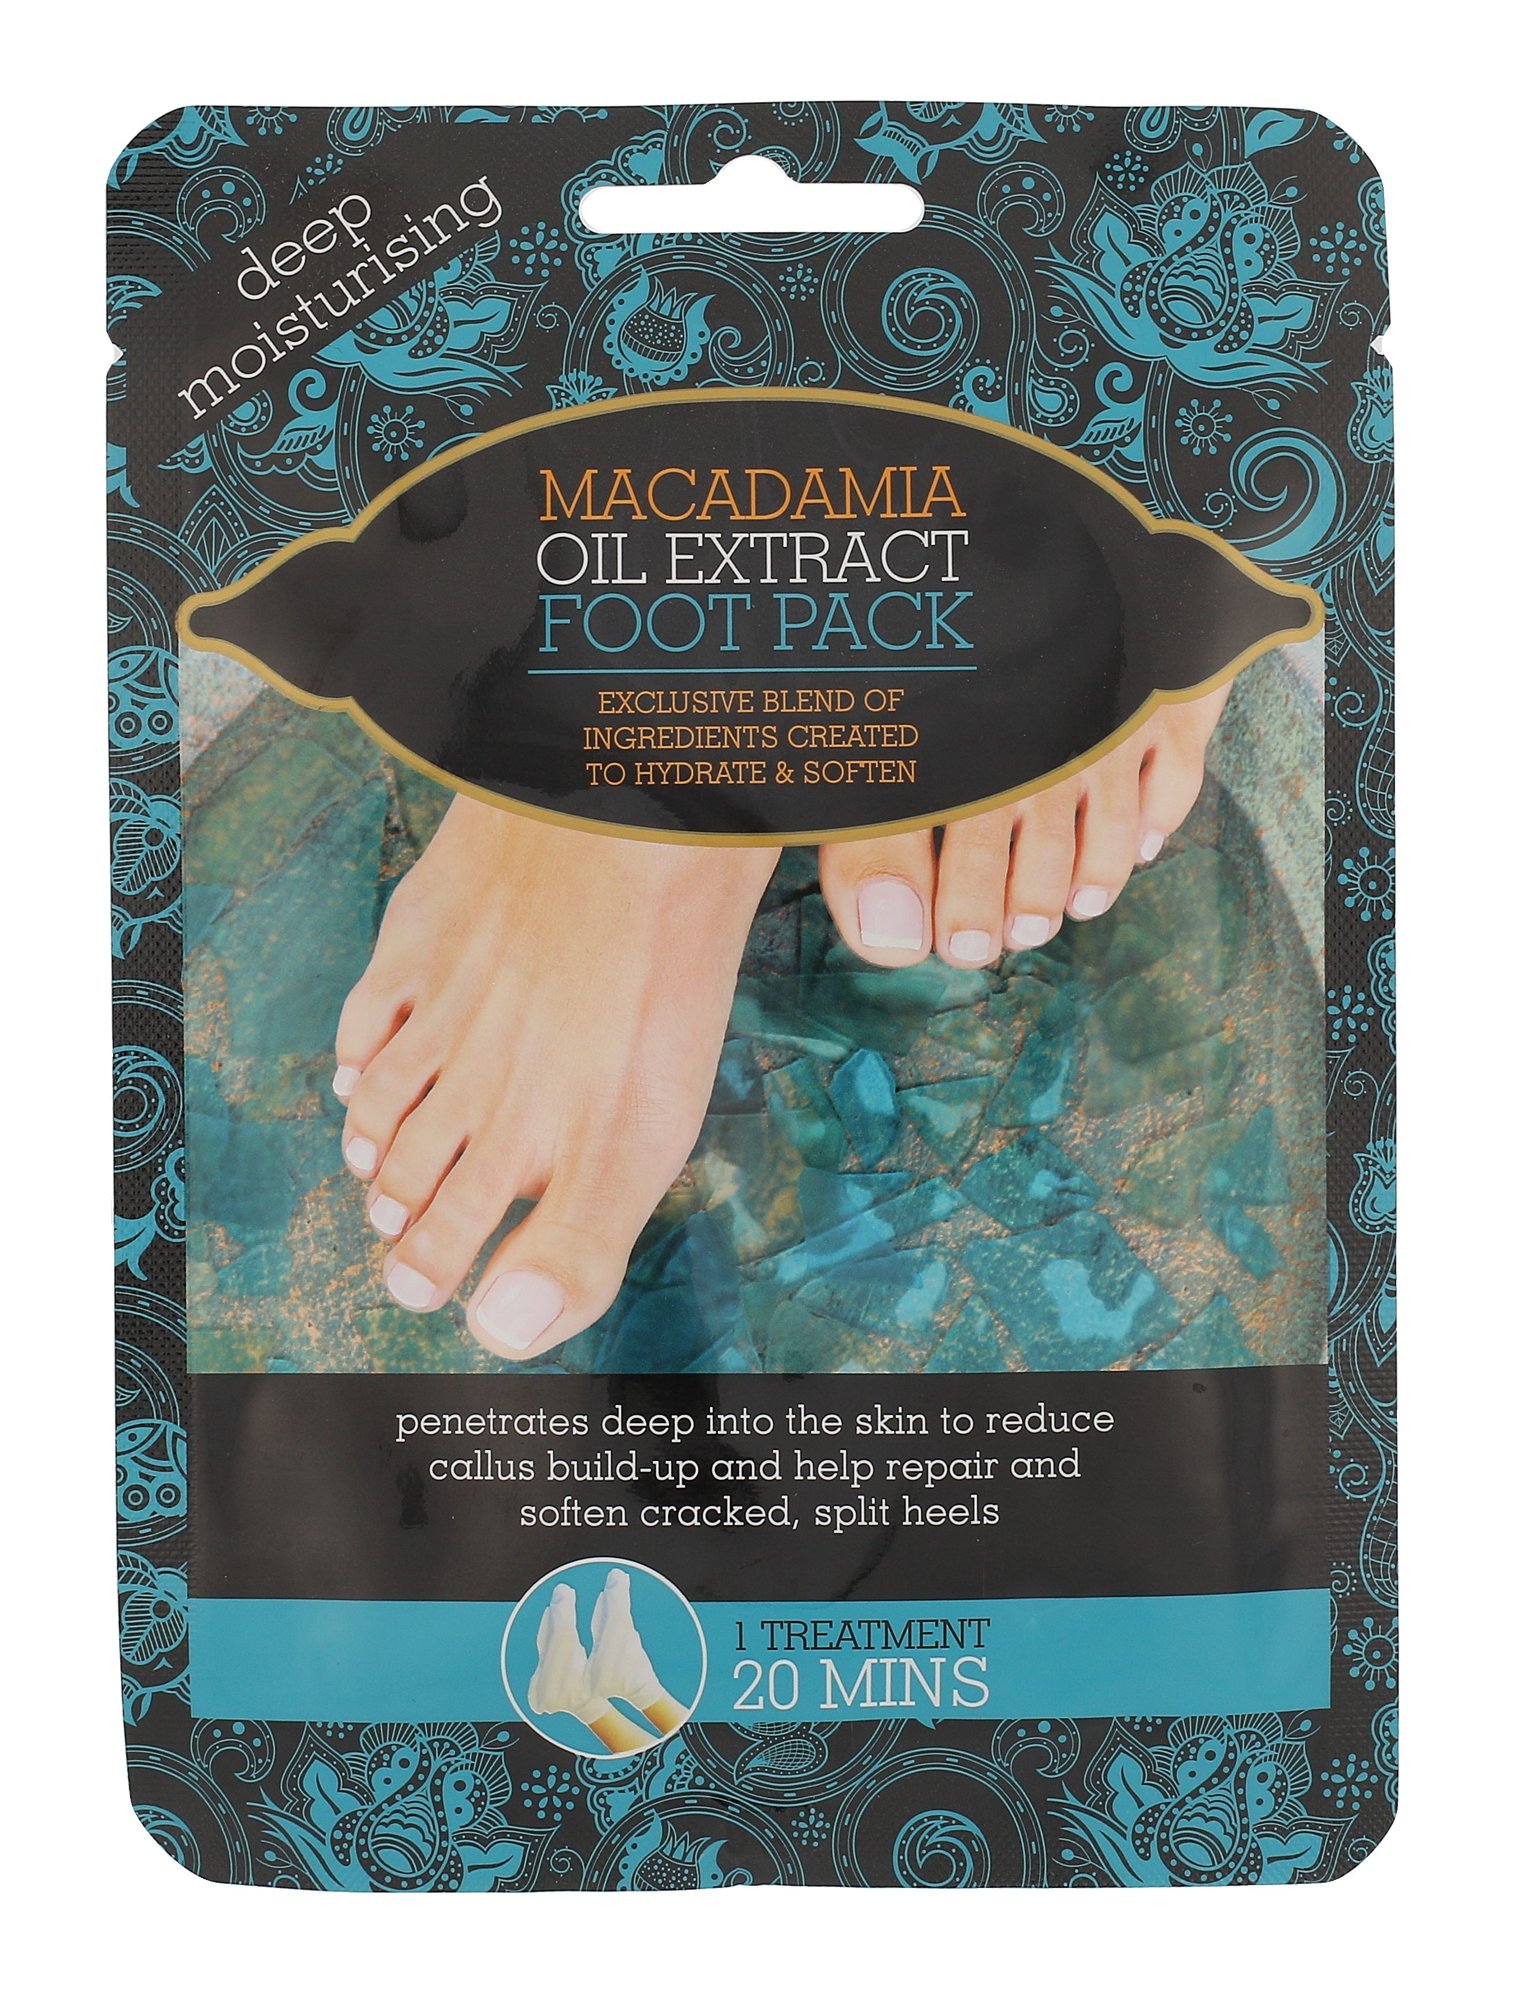 Xpel Macadamia Oil Extract Foot Pack